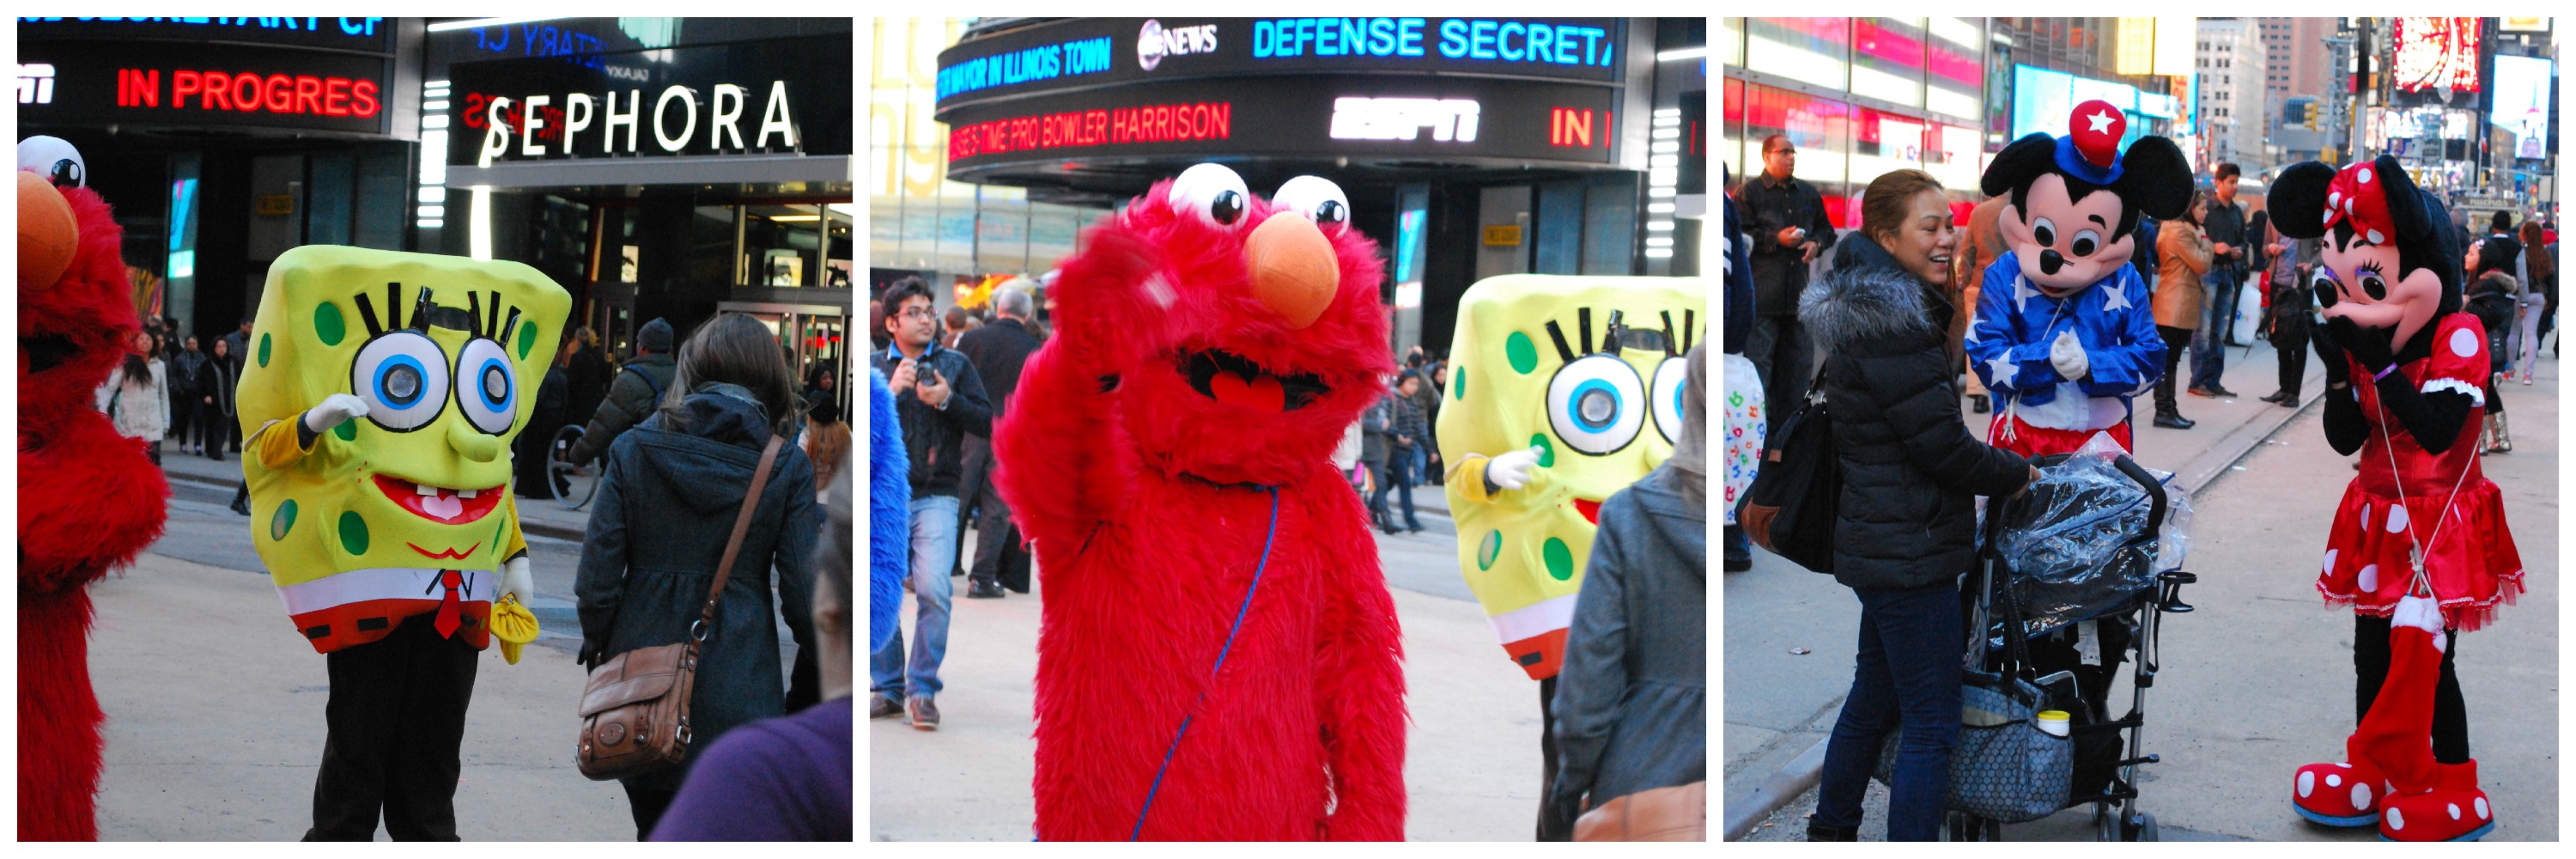 collage of times square cartoon characters